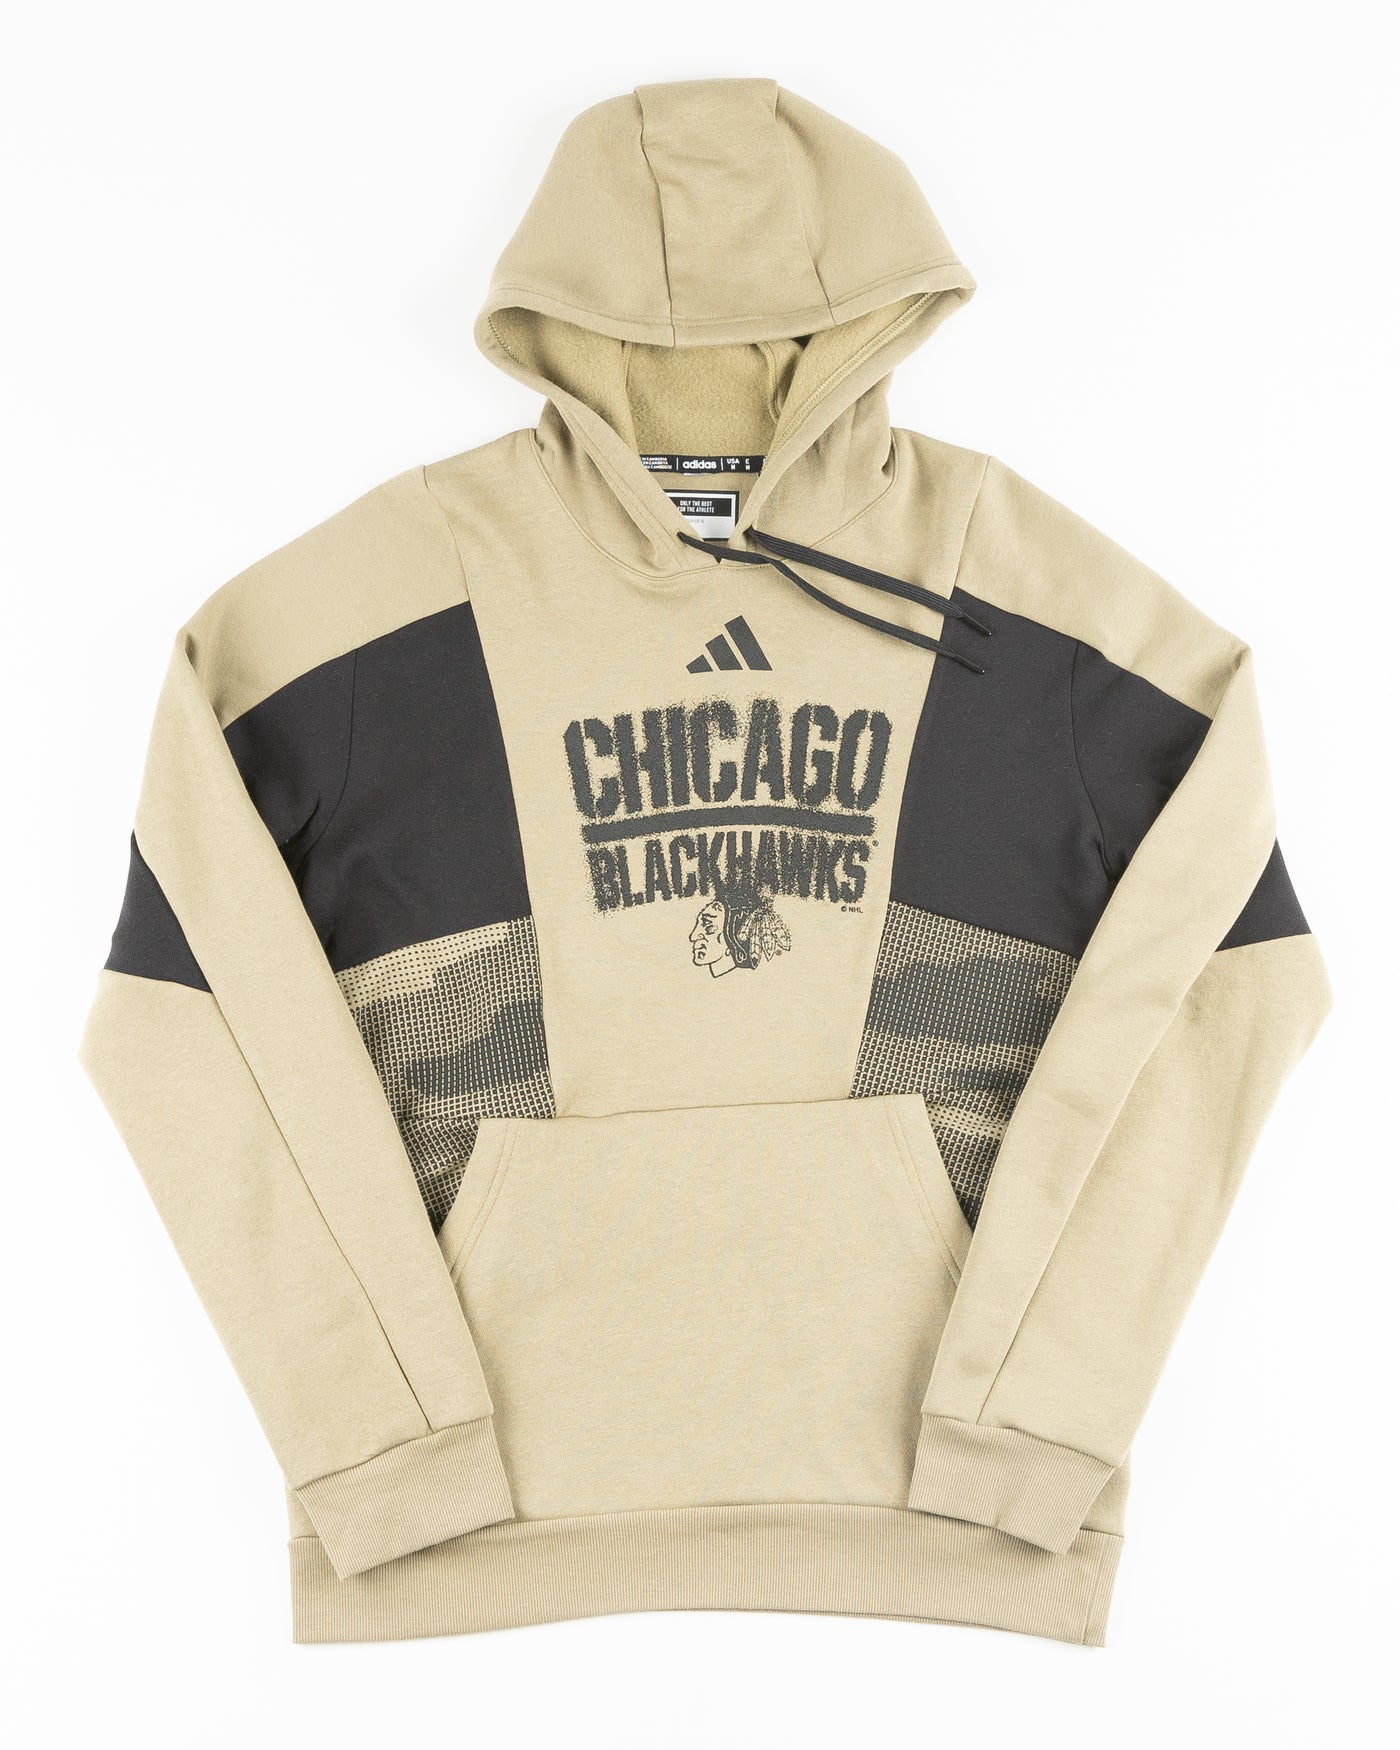 green and black camo colorblocked adidas hoodie with Chicago Blackhawks wordmark and primary logo across chest - front lay flat